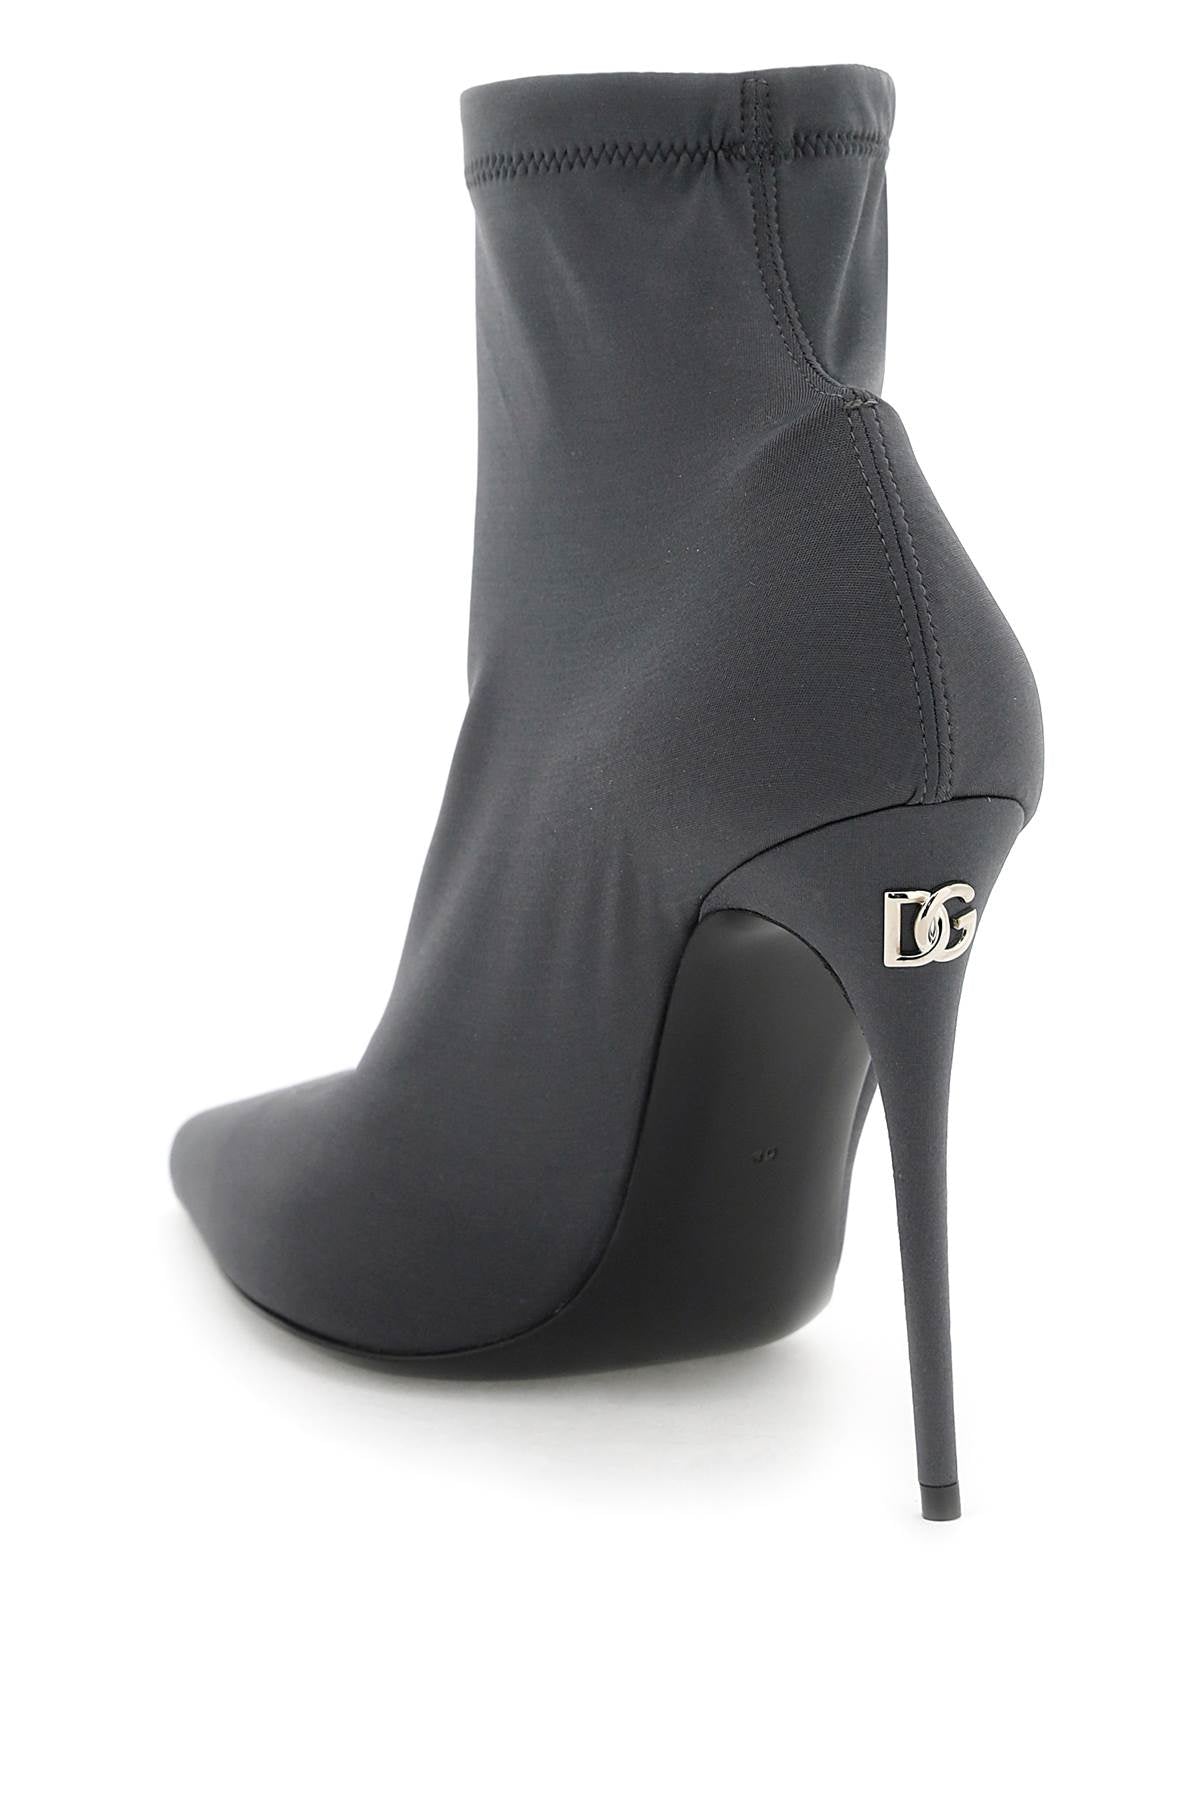 Dolce & Gabbana Stretch Jersey Ankle Boots   Grigio